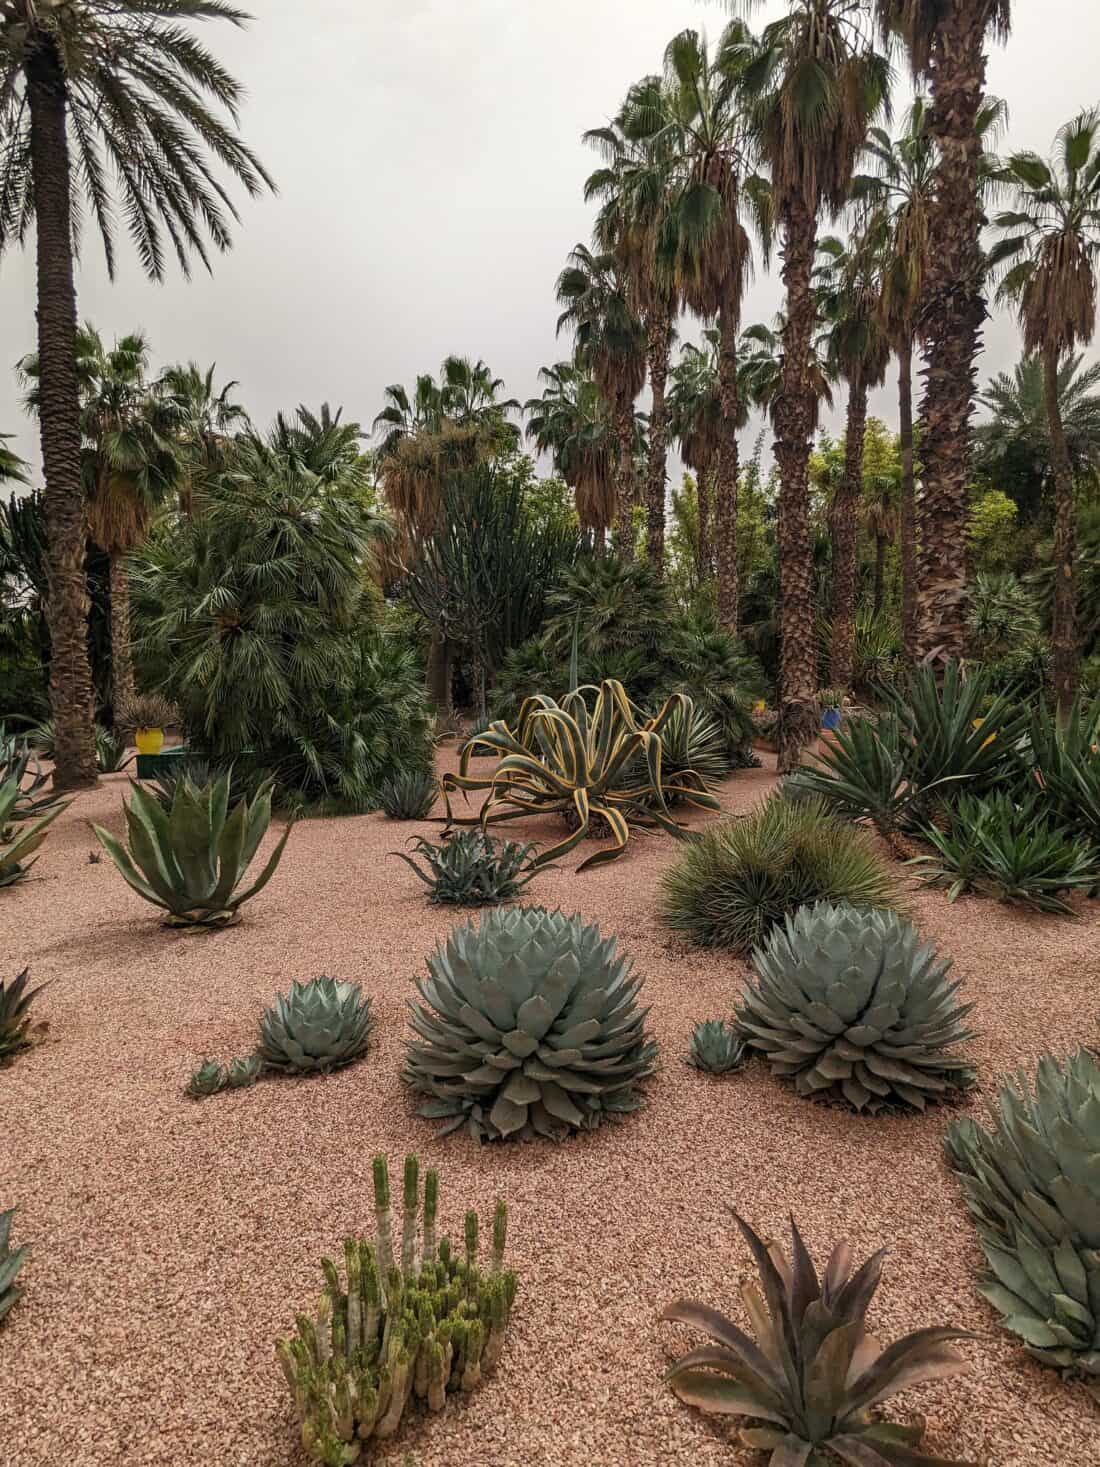 A desert garden with a variety of cacti and palm trees under overcast skies.